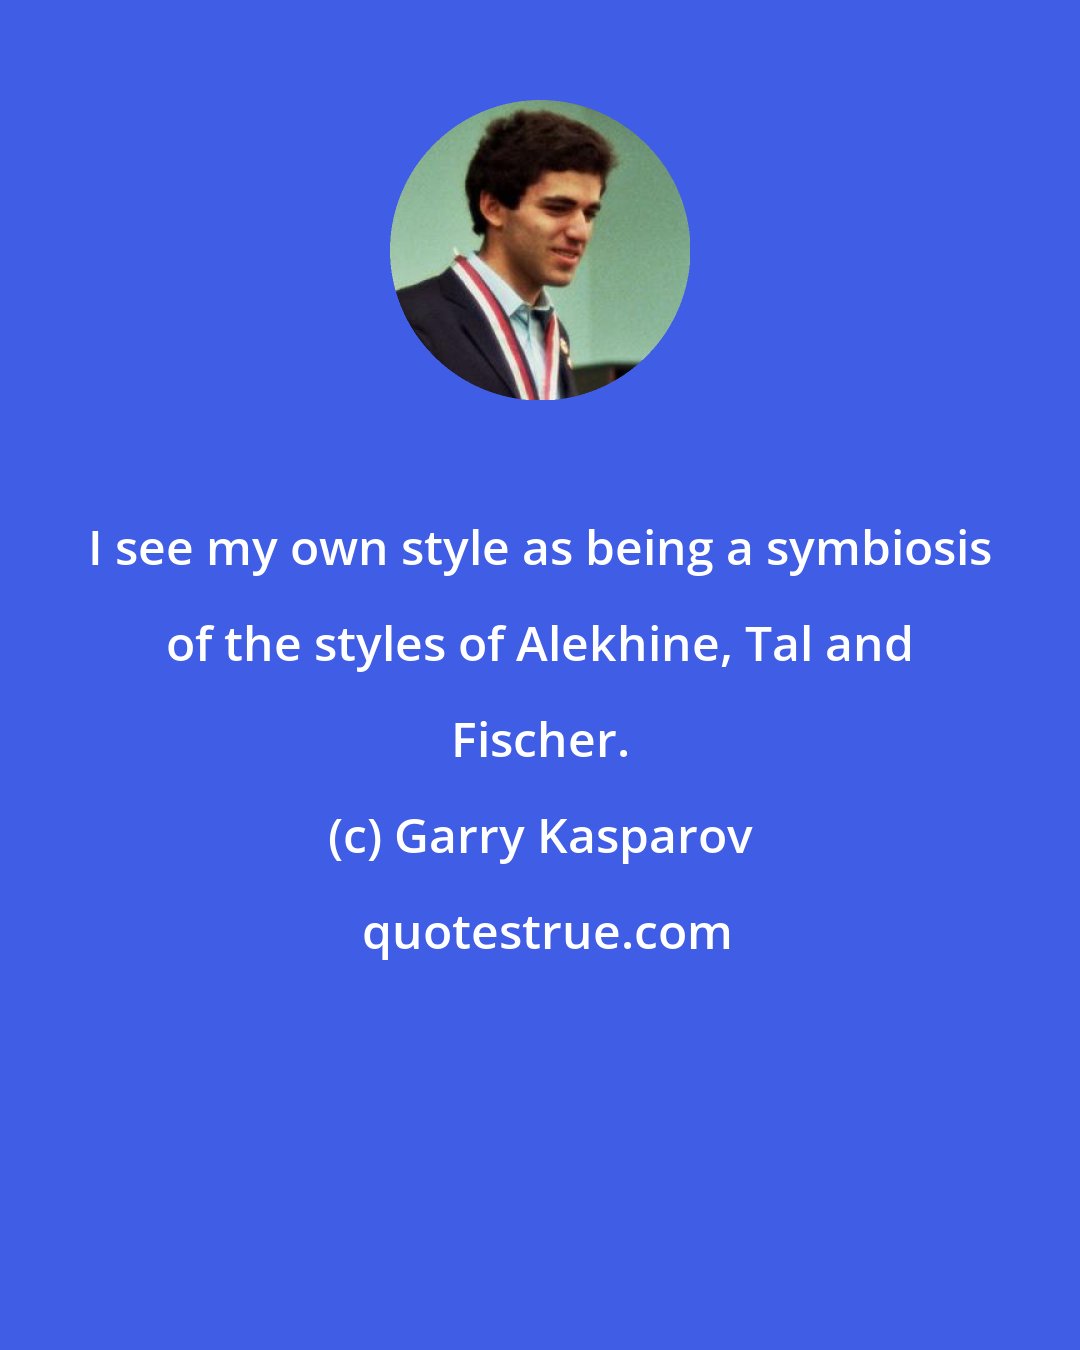 Garry Kasparov: I see my own style as being a symbiosis of the styles of Alekhine, Tal and Fischer.